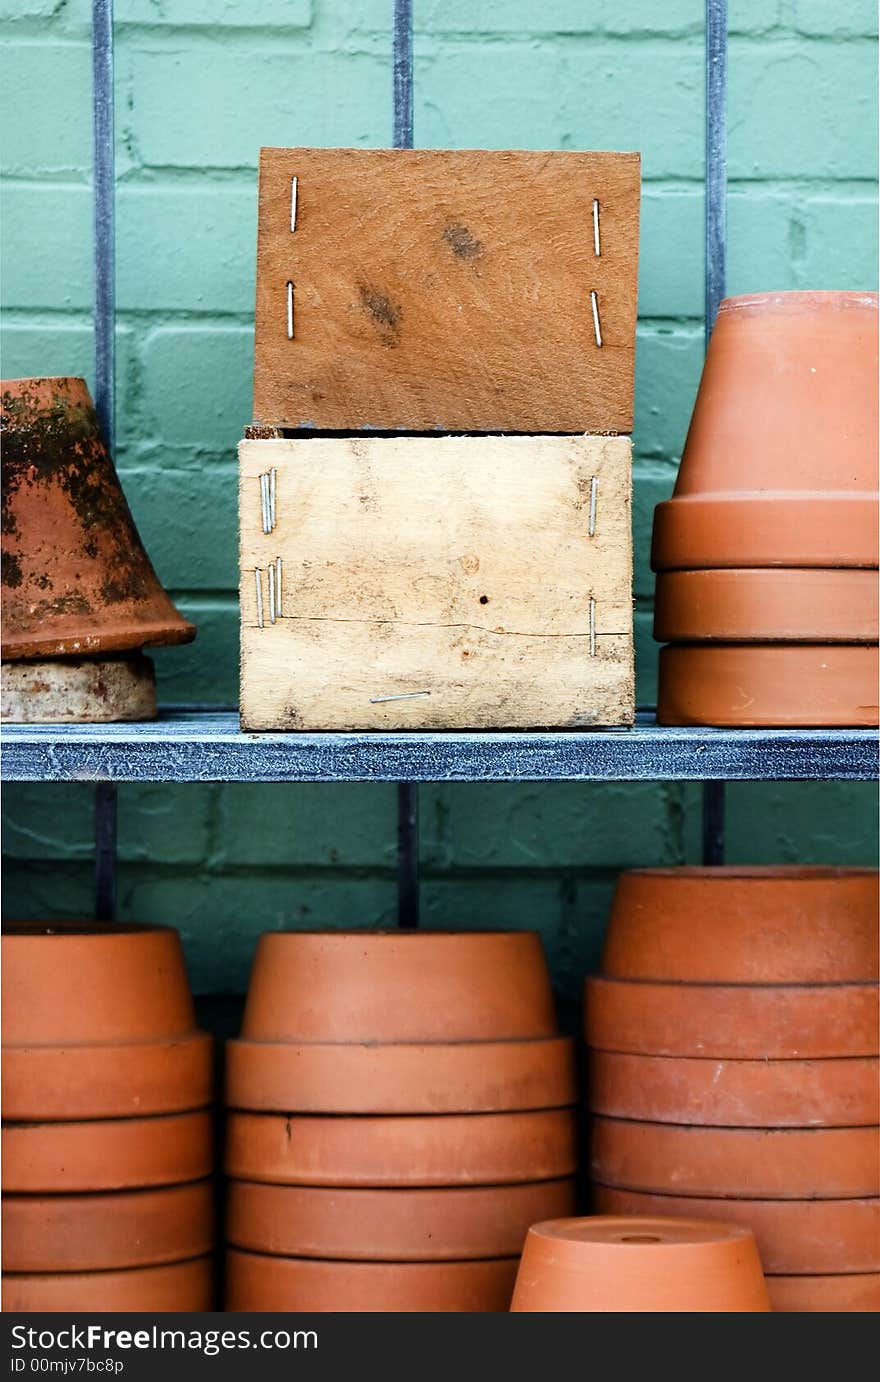 Two wooden boxes with space for advertisement surrounded with brown pots. Two wooden boxes with space for advertisement surrounded with brown pots